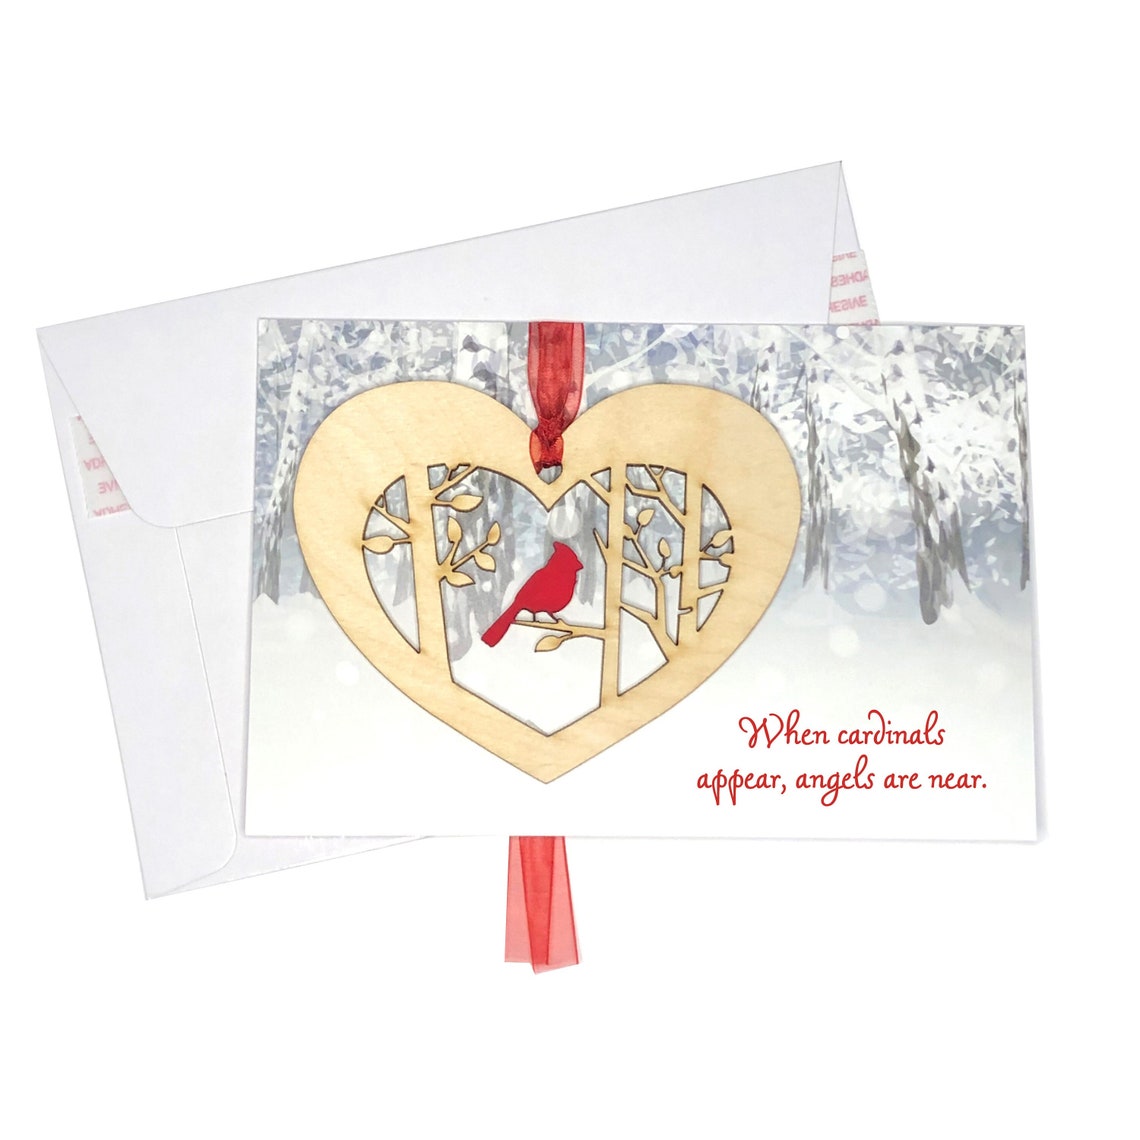 Cards: B Wooden Cardinal Ornament with Card When Cardinals appear, angels are near.